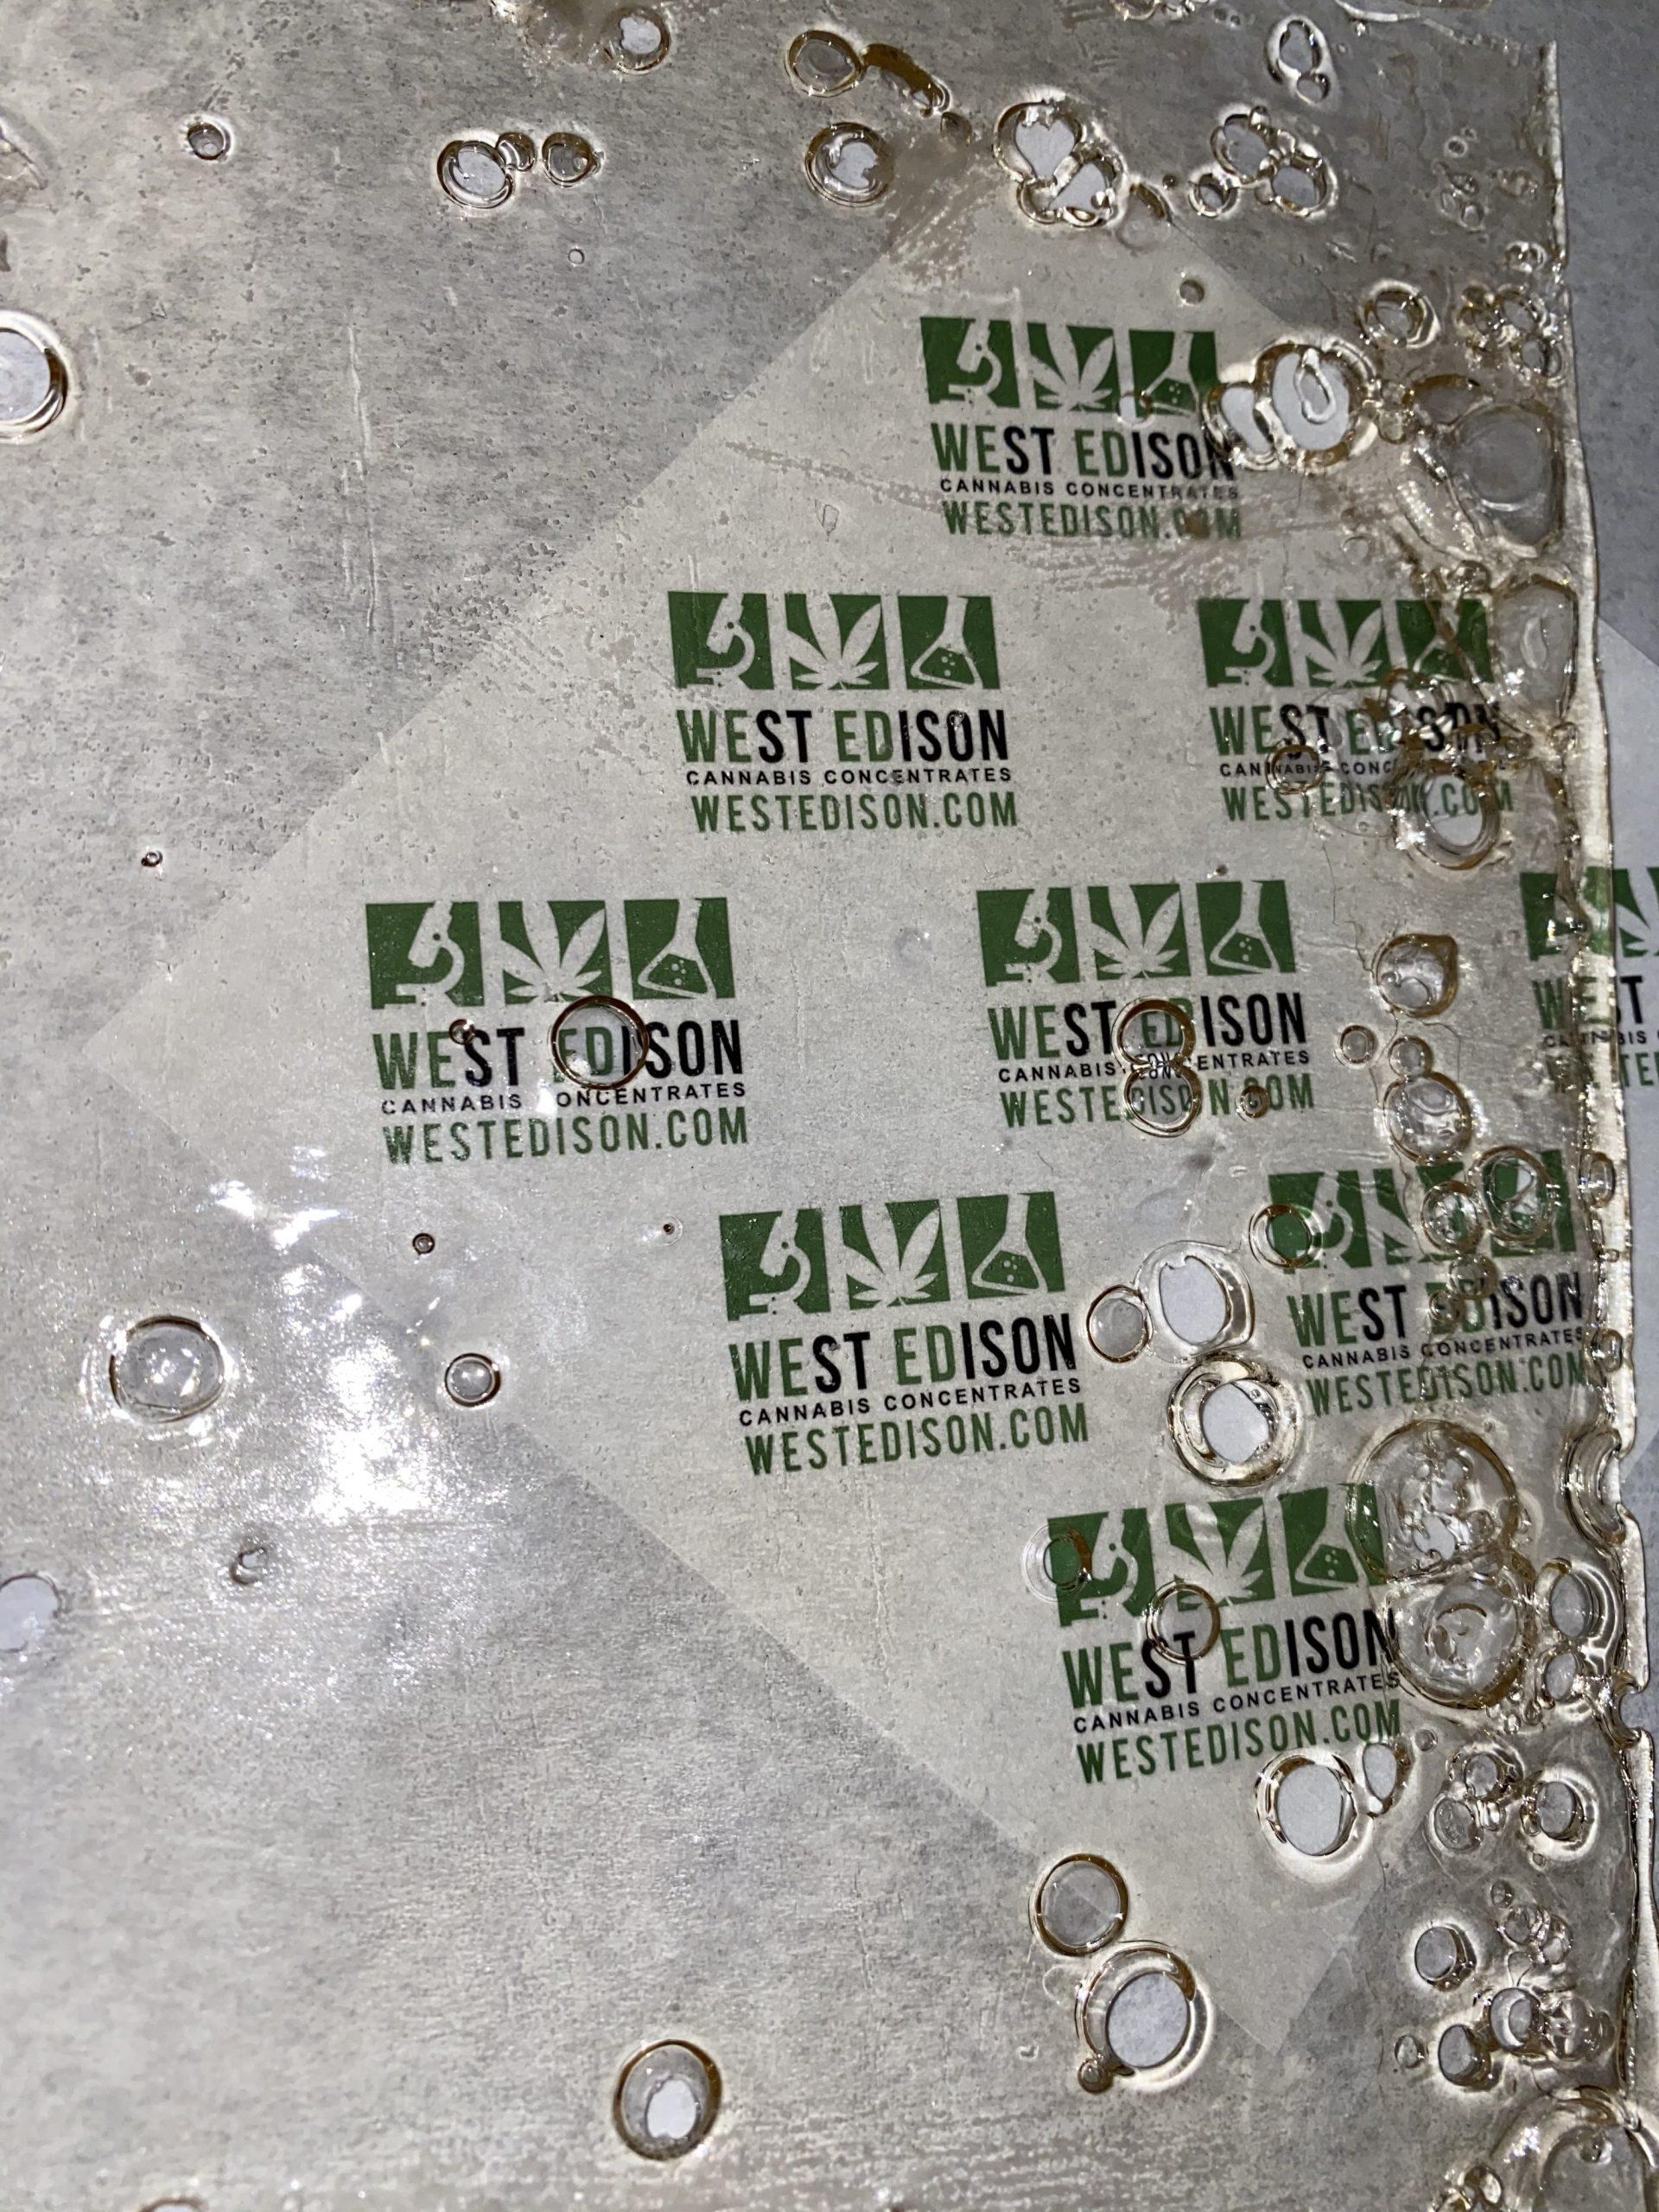 WEST EDISON CANNABIS CONCENTRATES: GHOST WAX